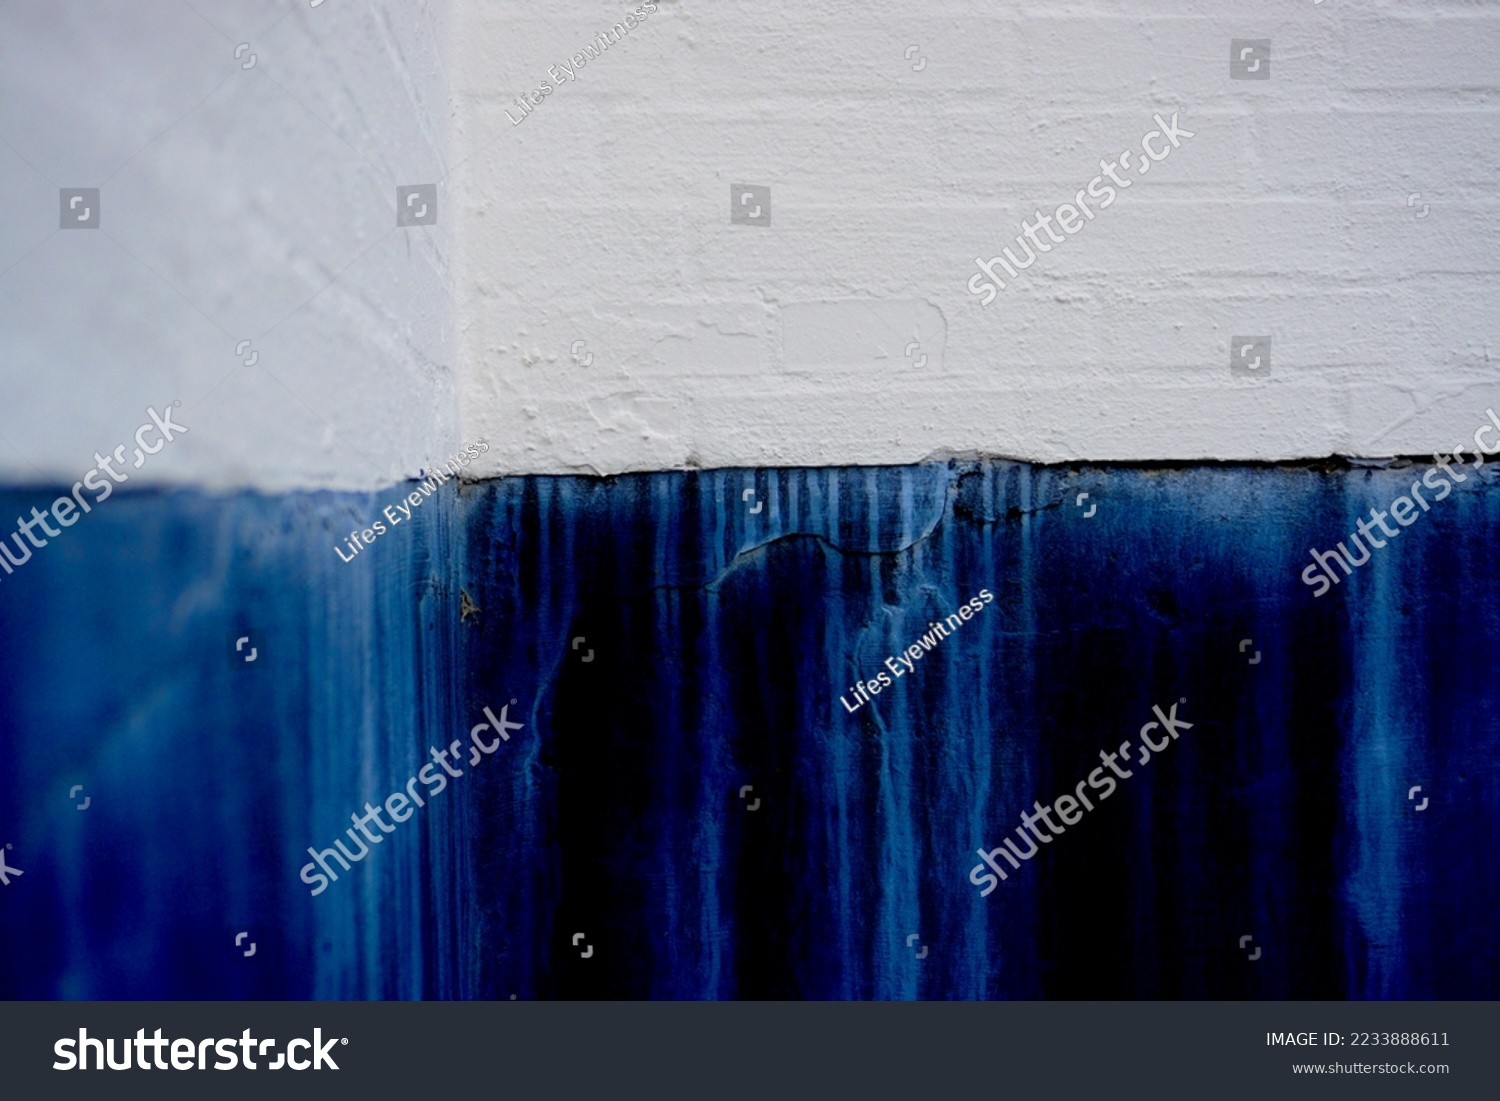 Running painting on wall caused by rain  #2233888611